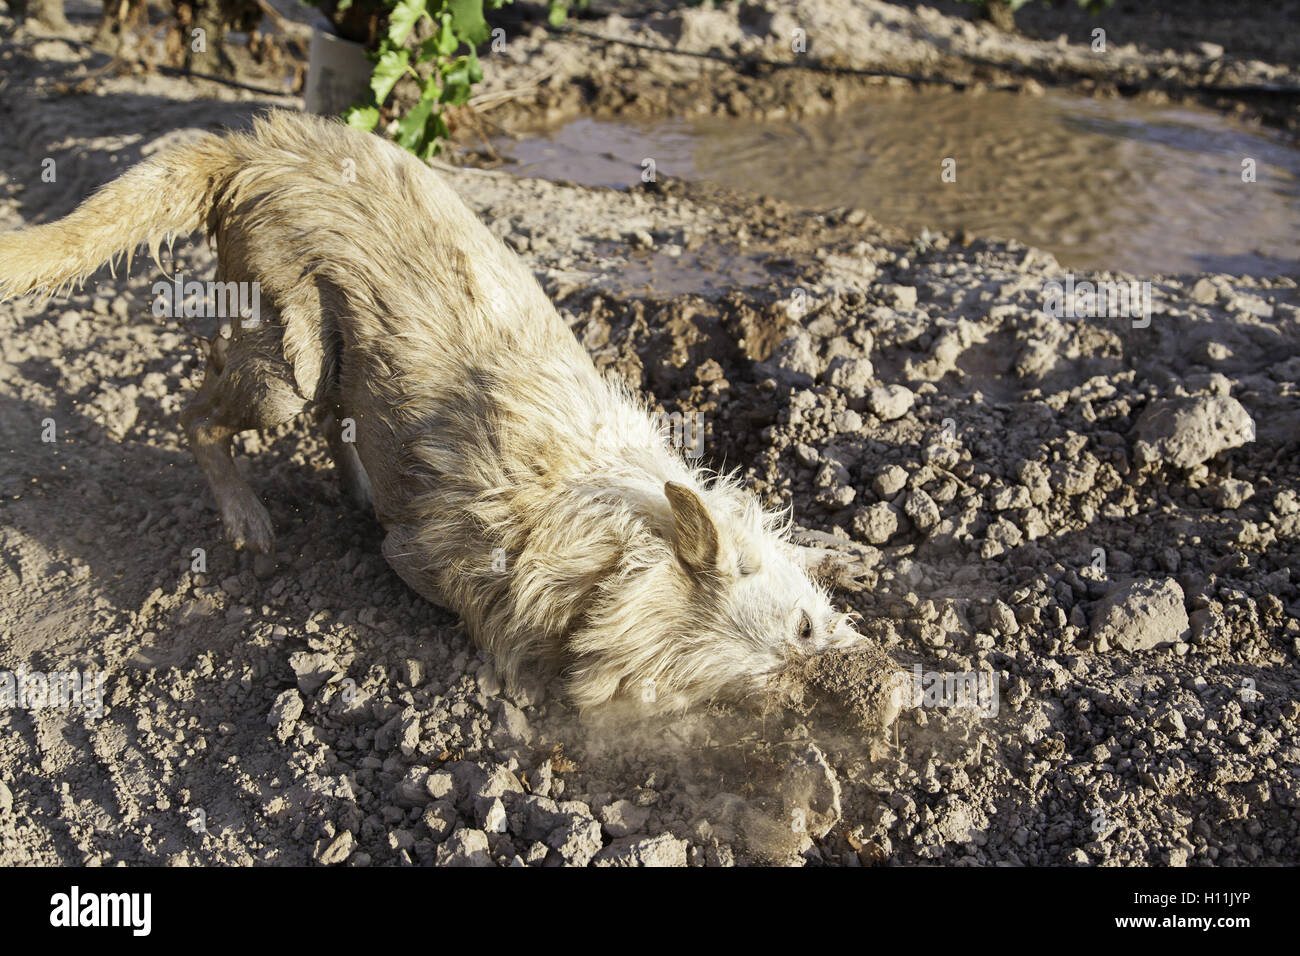 Dirty wet dog in mud puddle, nature Stock Photo